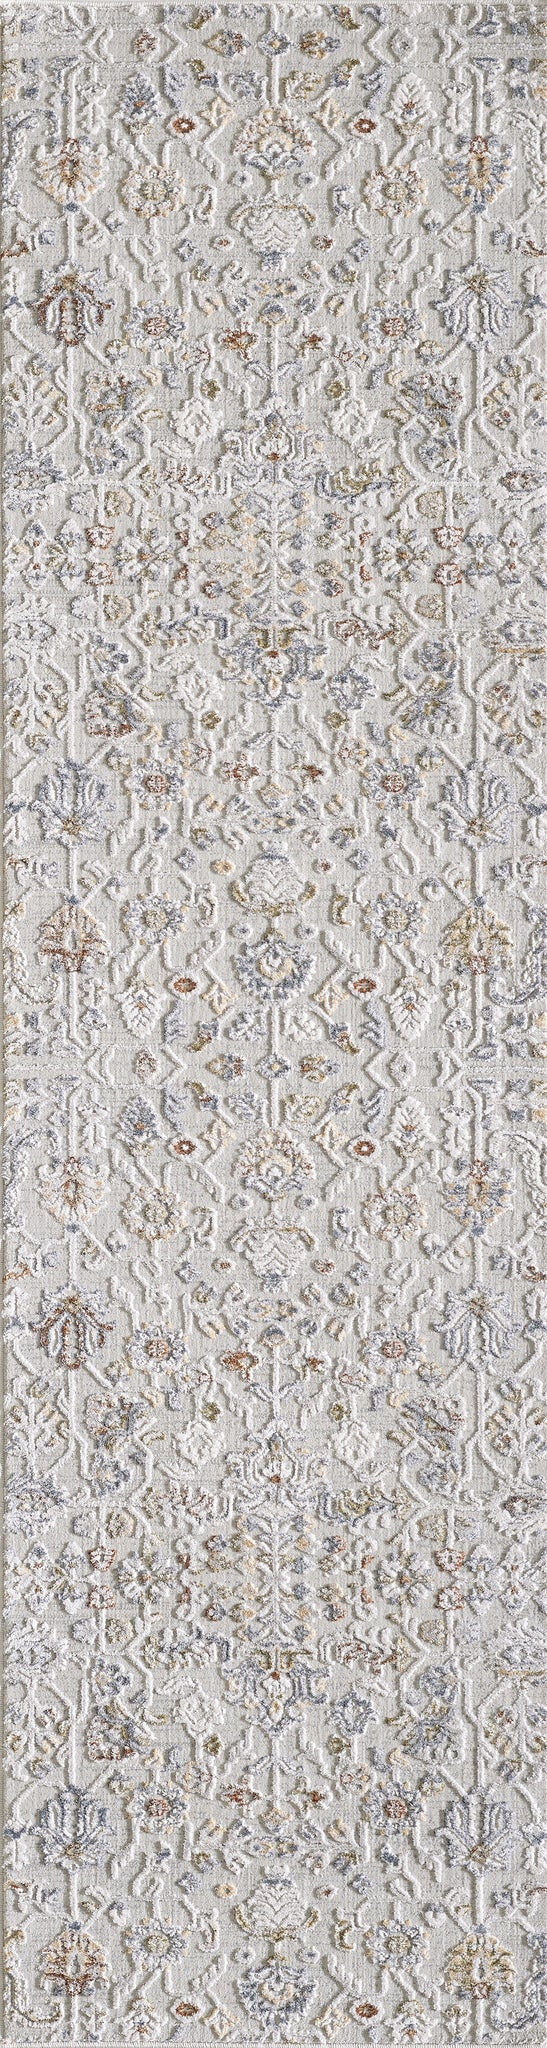 KAS Generations 7041 Ivory Bentley Area Rug Lifestyle Image Feature